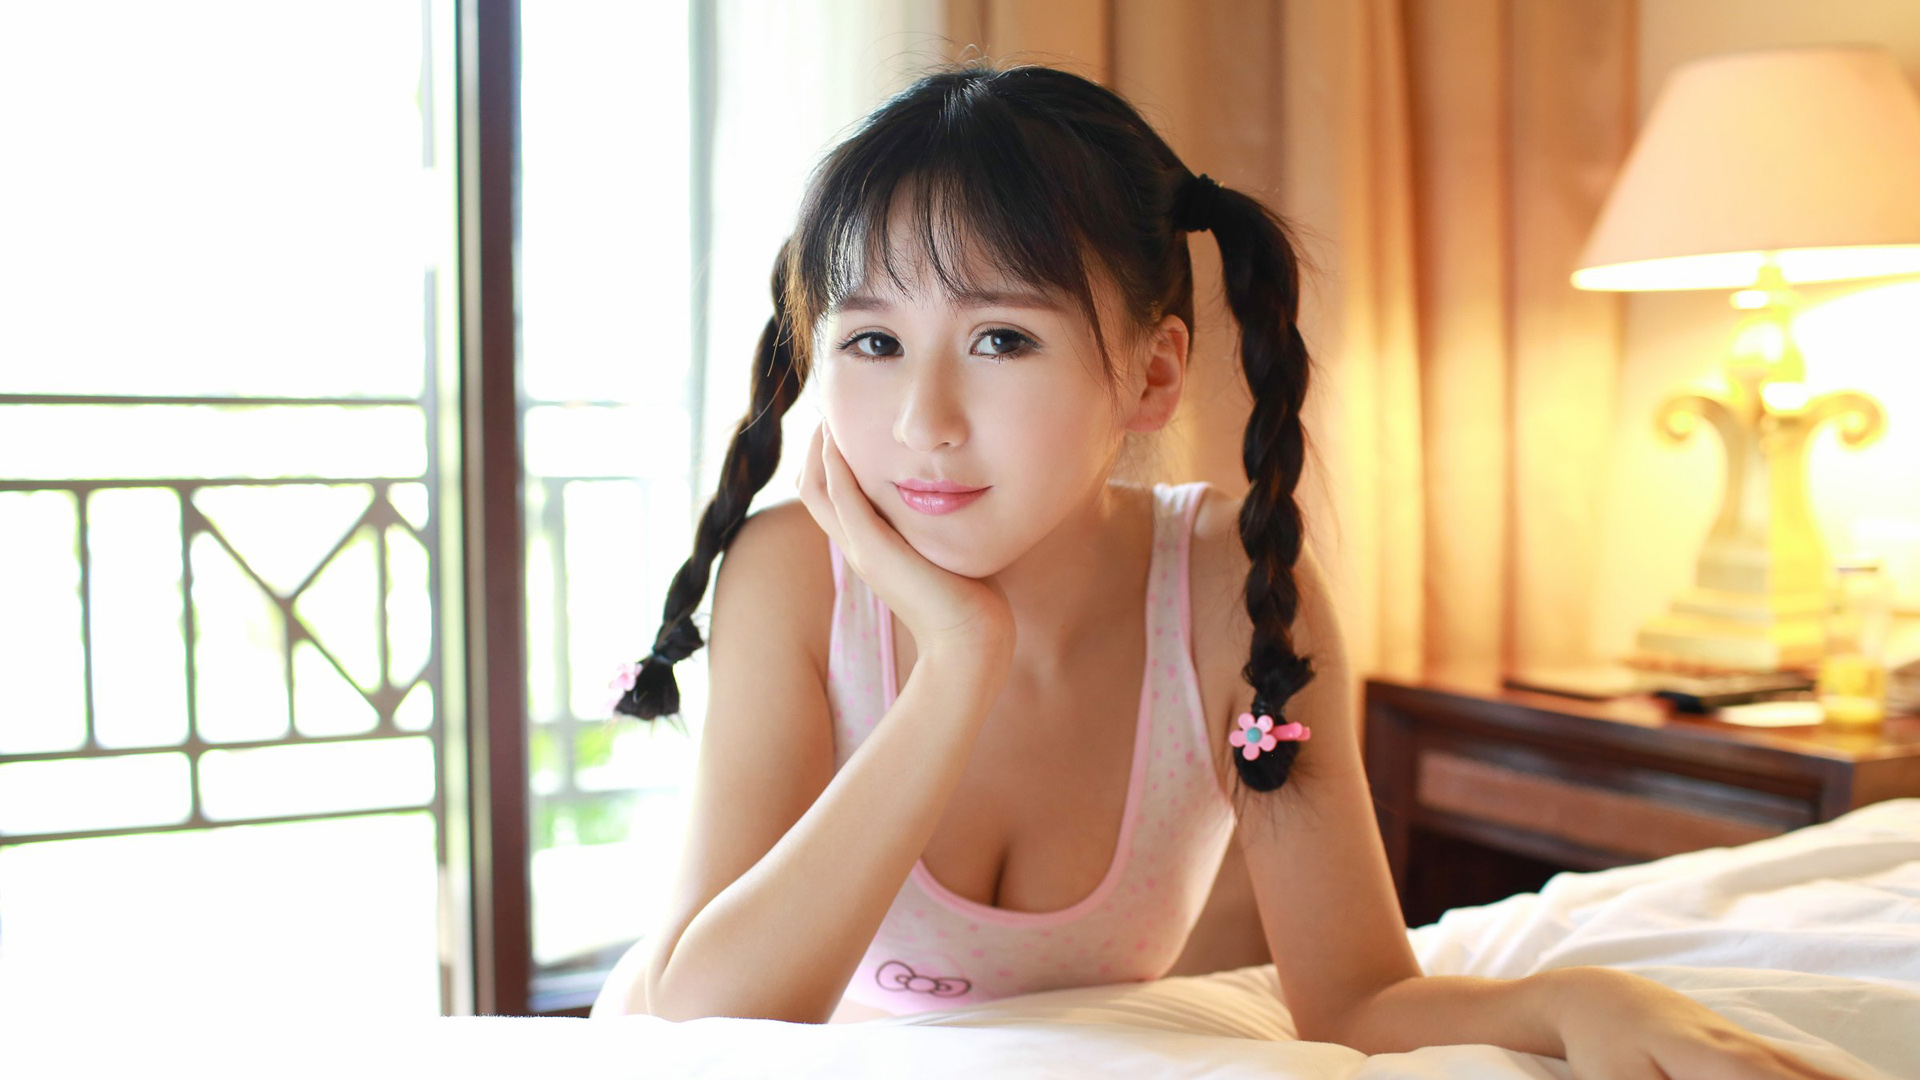 Braids Asian Face Twintails Looking At Viewer Lamp Hand On Face Ear Pink 1920x1080